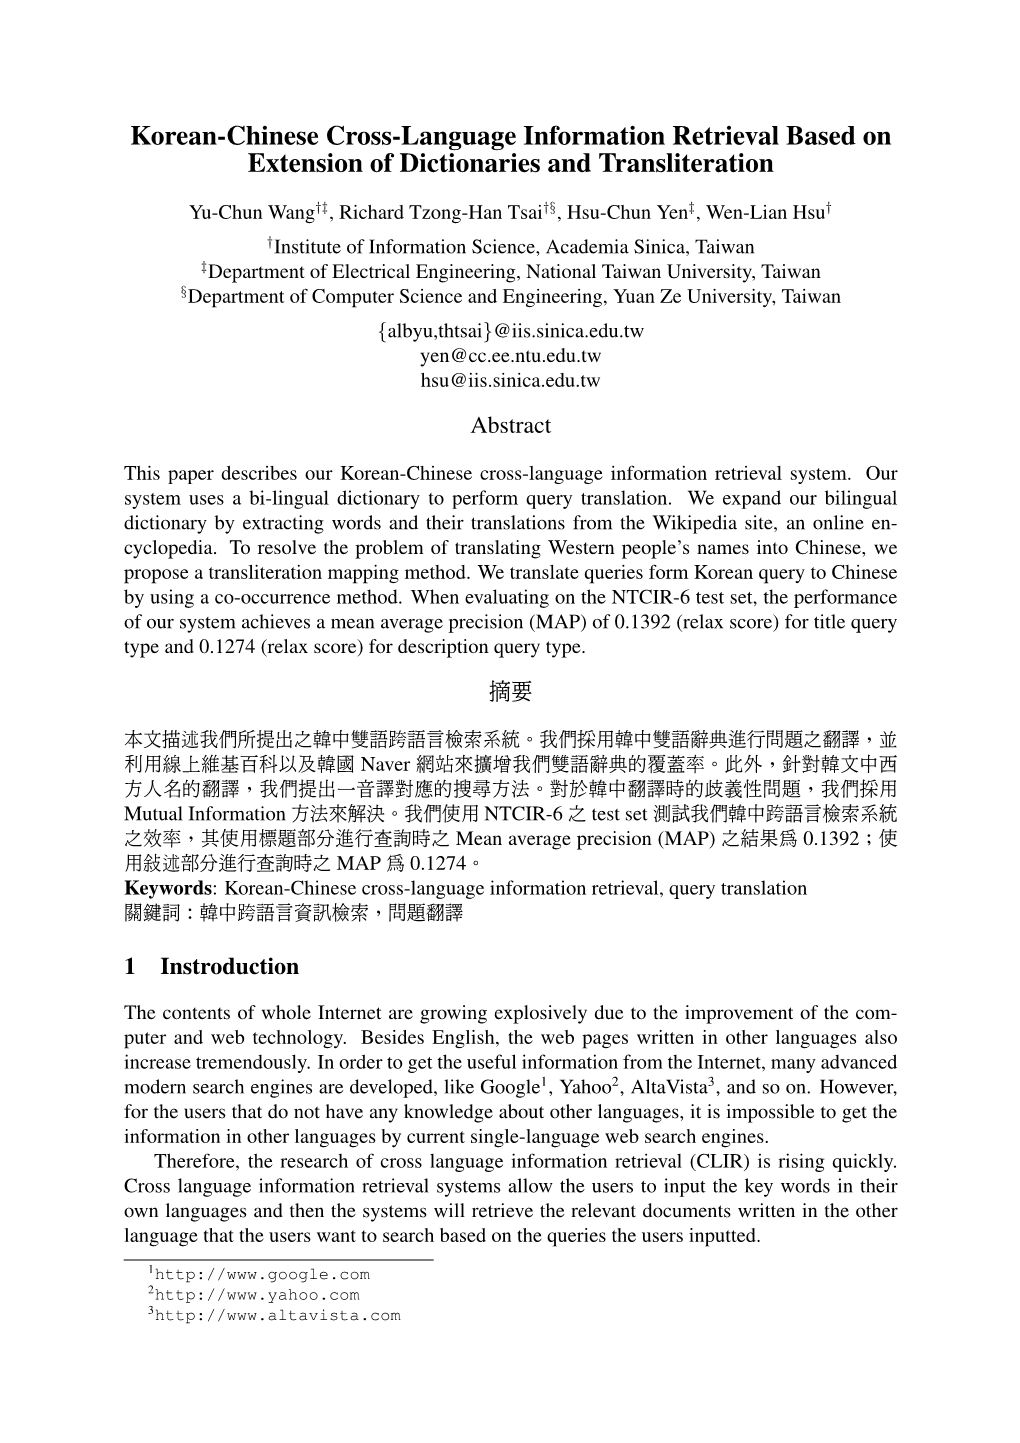 Korean-Chinese Cross-Language Information Retrieval Based on Extension of Dictionaries and Transliteration